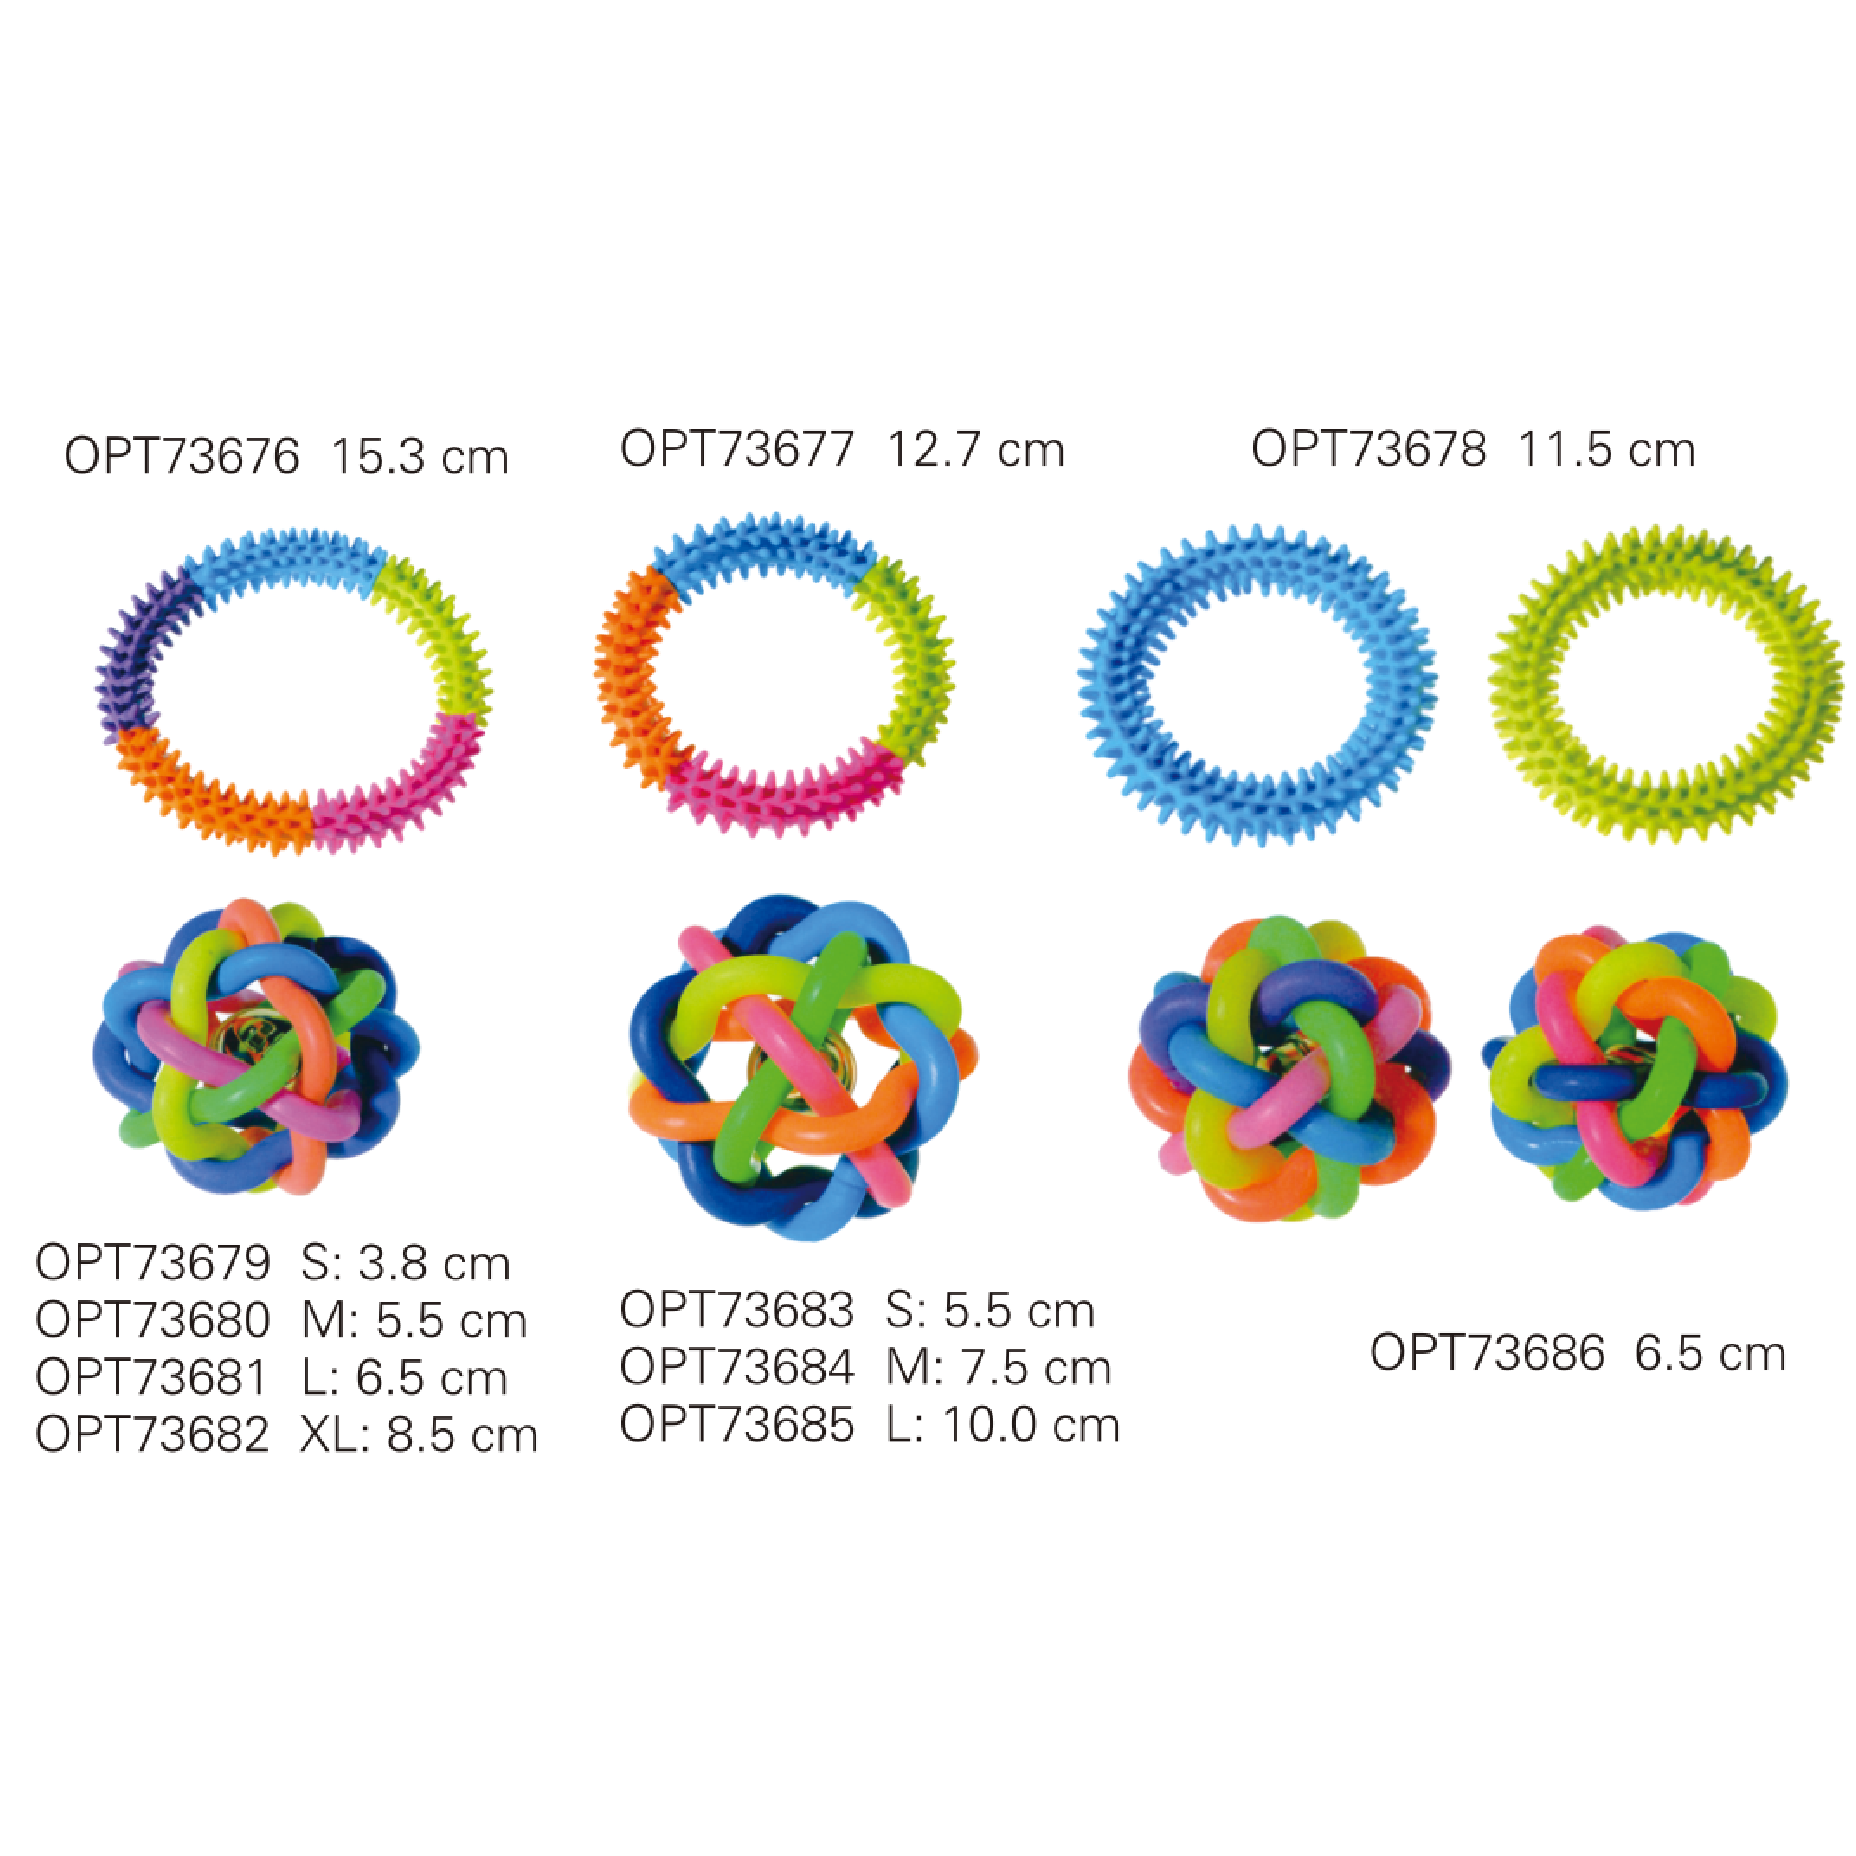 OPT73676-OPT73686 Dog toy rubber